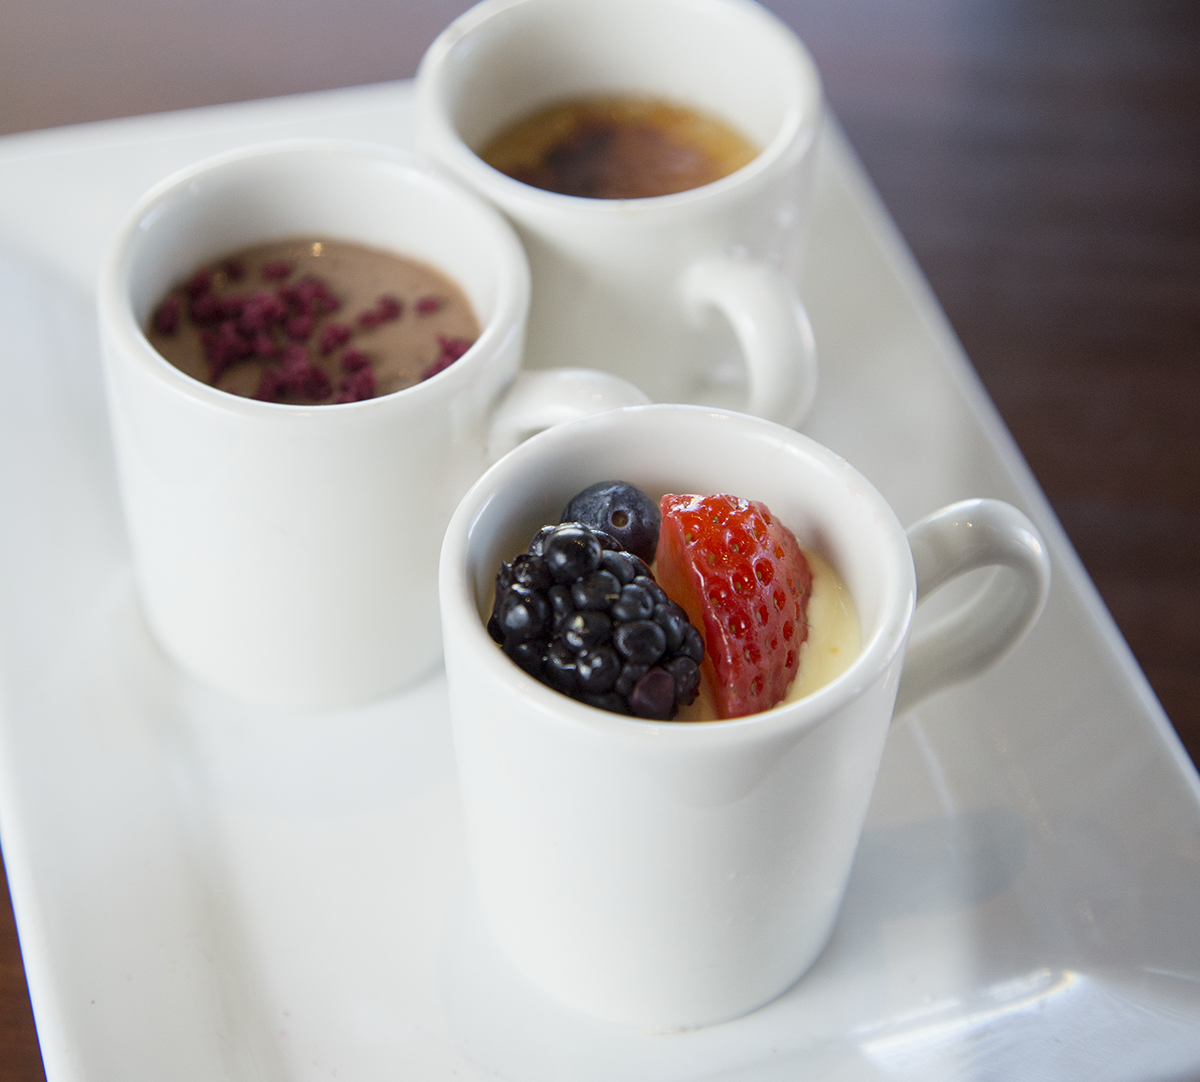 The mini crème brûlée trio at the Southside Houlihan’s is part of July's 7 Good Things list.